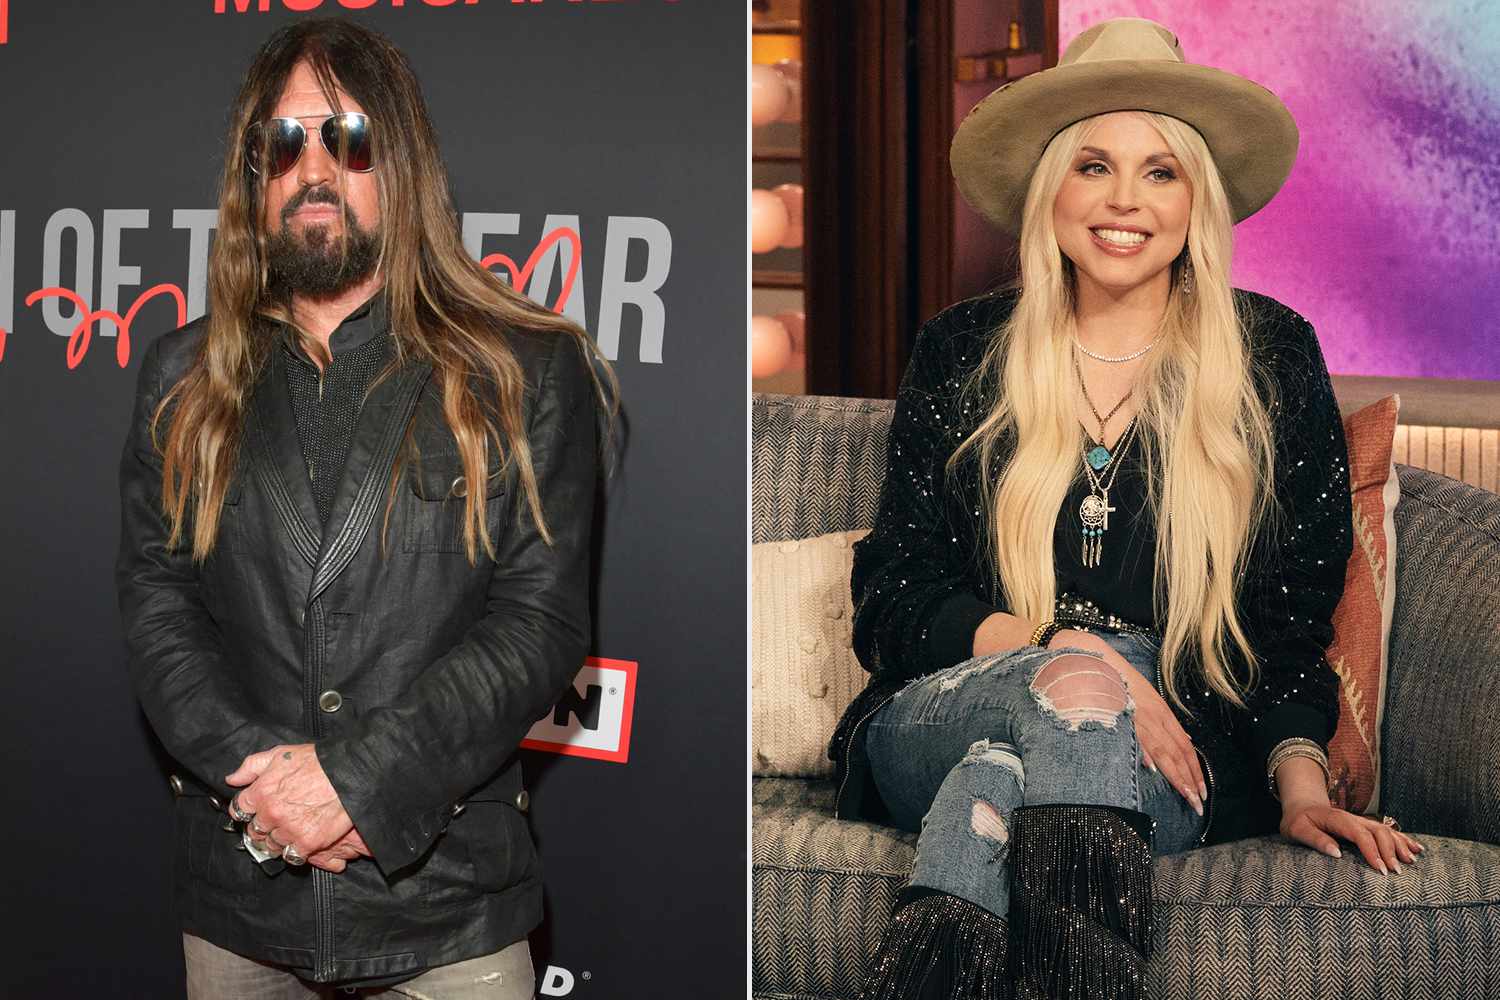 Billy Ray Cyrus and Firerose settle their contentious divorce: 'A sigh of relief'